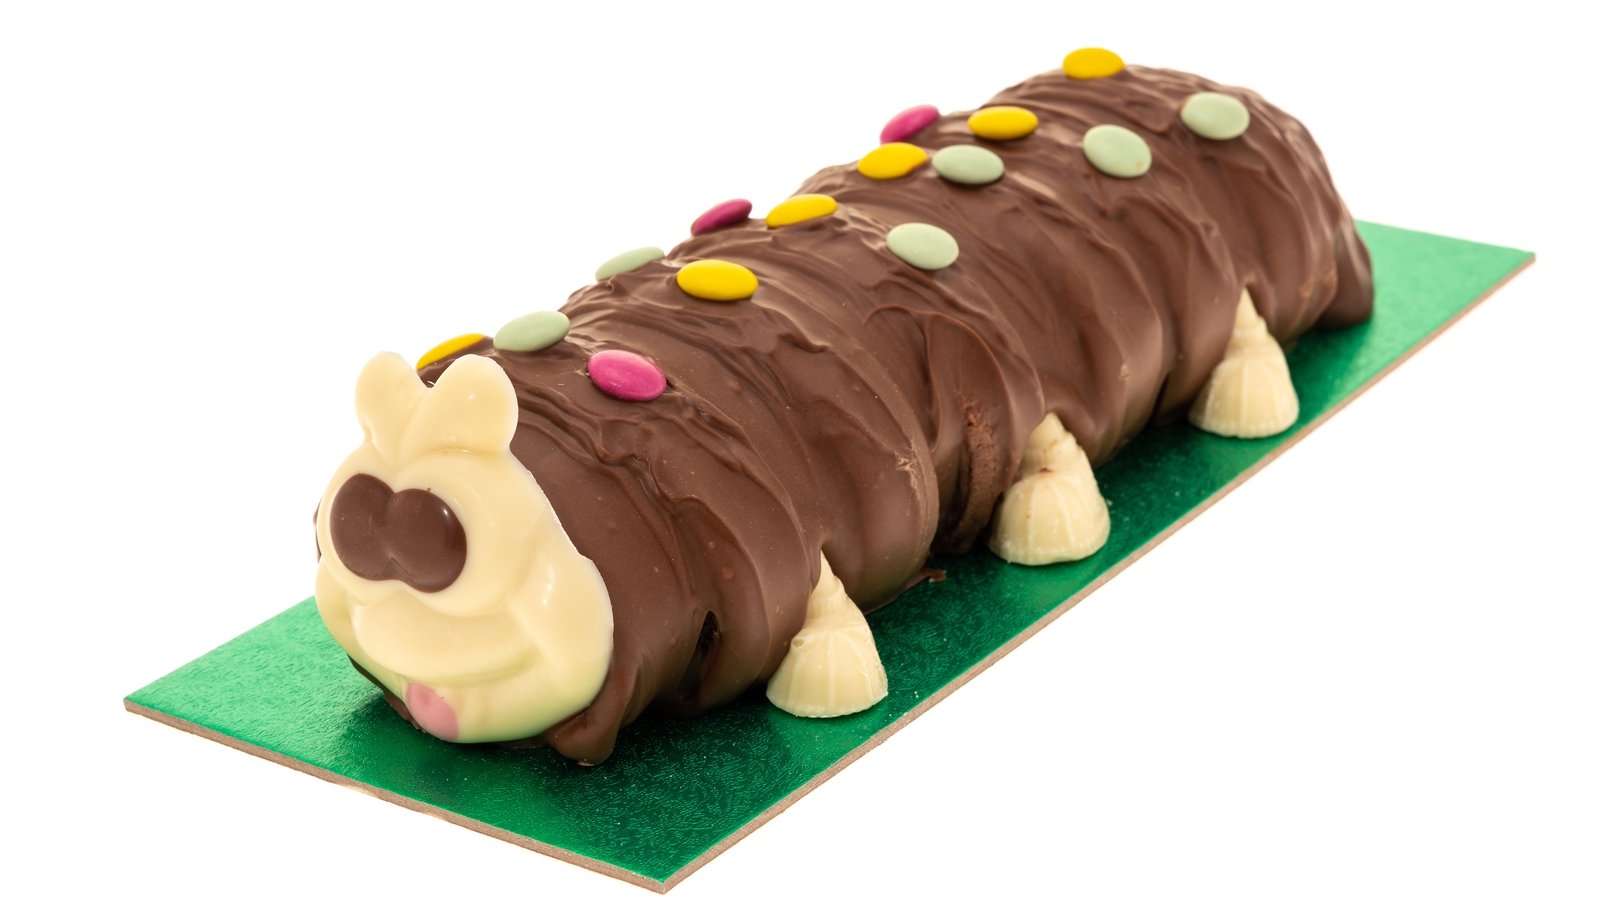 Colin the Caterpillar and the curious case of IP rights